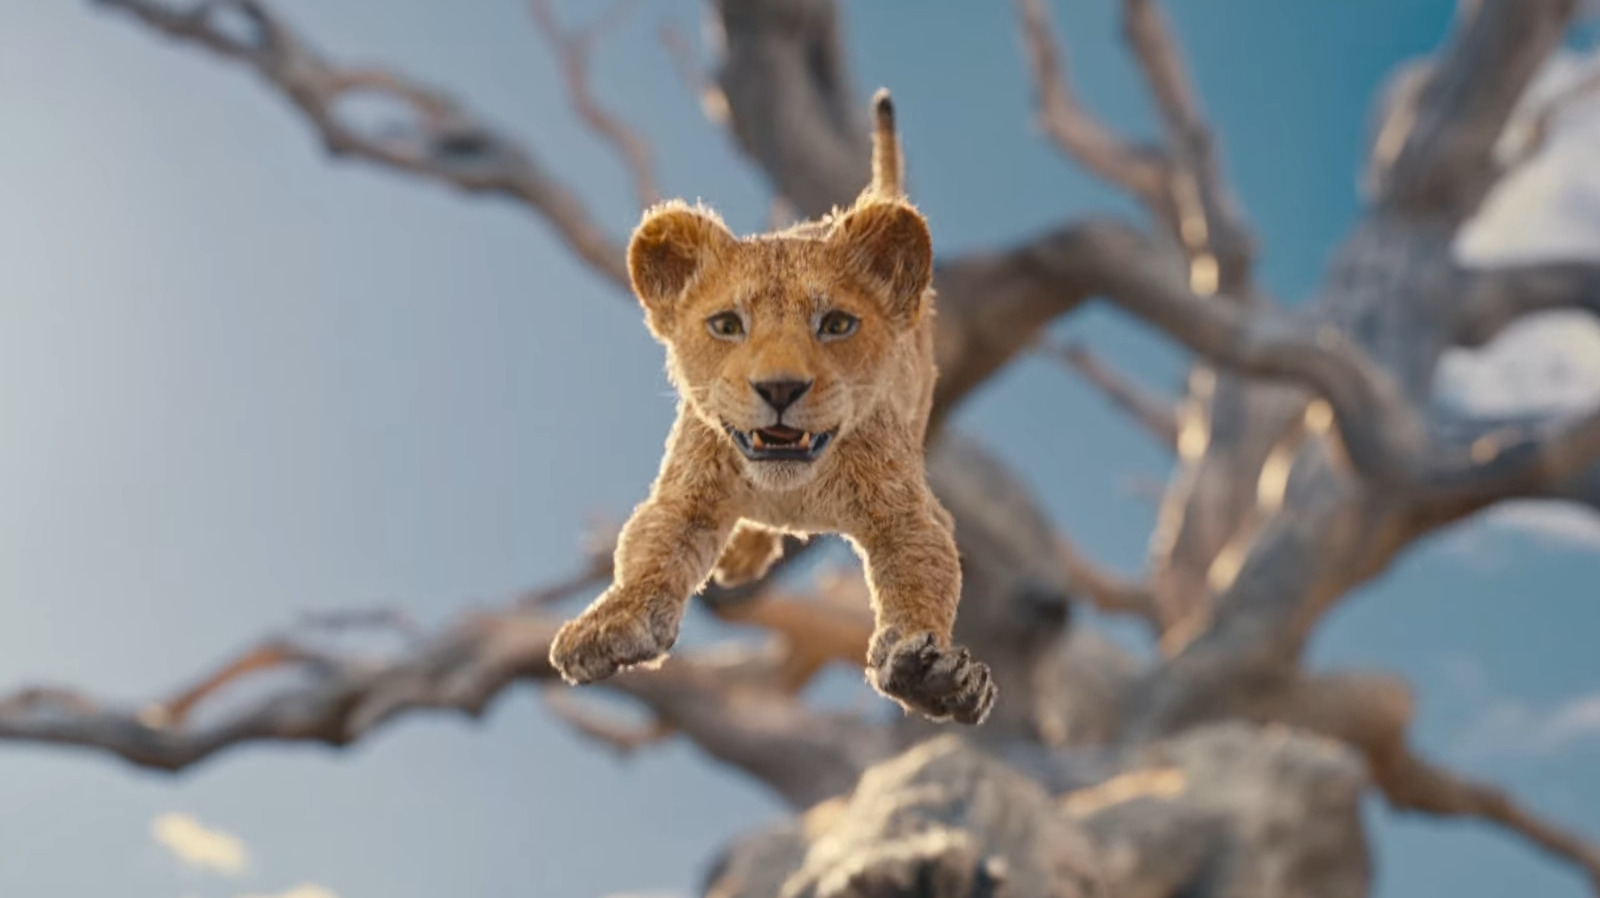 New Disney Trailer: Meet Mufasa – The Adorable Young Lion King Cub!